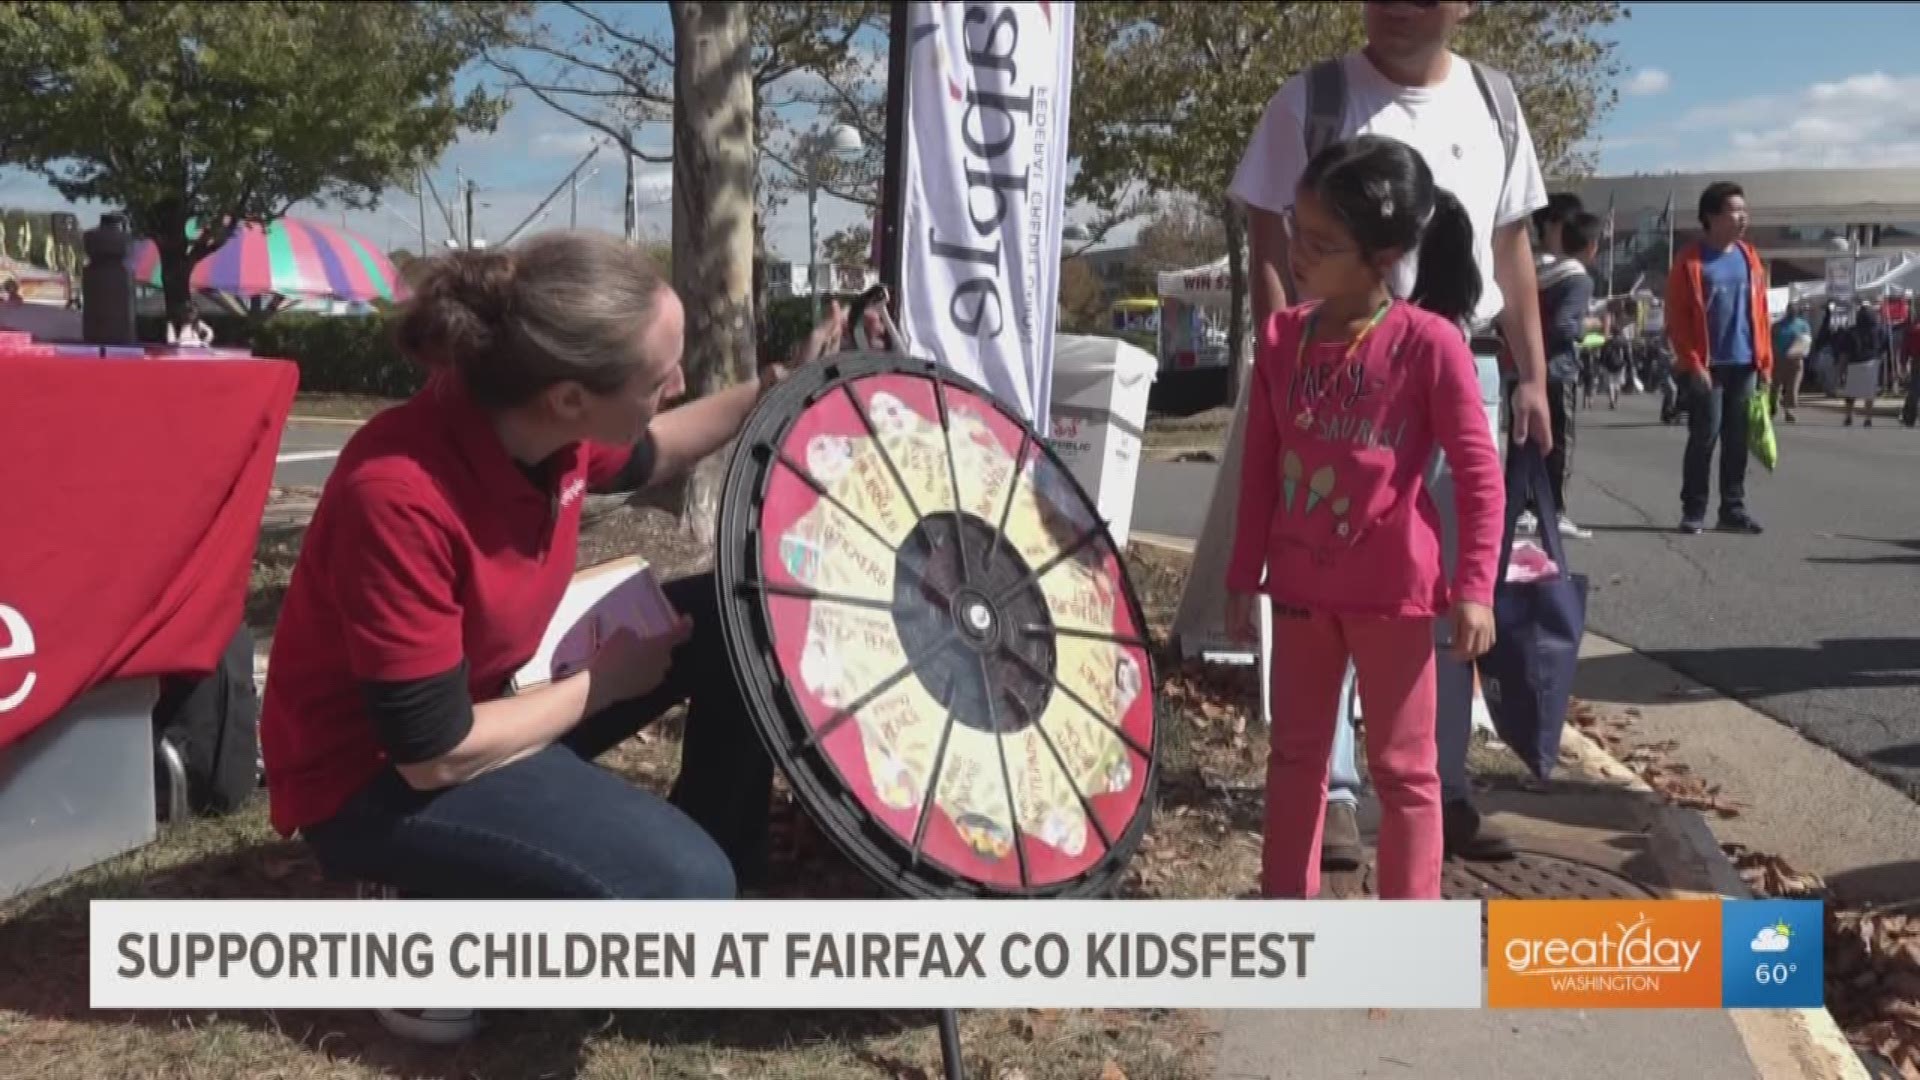 Apple Federal Credit Union helped 75 children enjoy beautiful fall weather at the Fairfax Co. Kidsfest. This segment was sponsored by Apple Federal Credit Union.